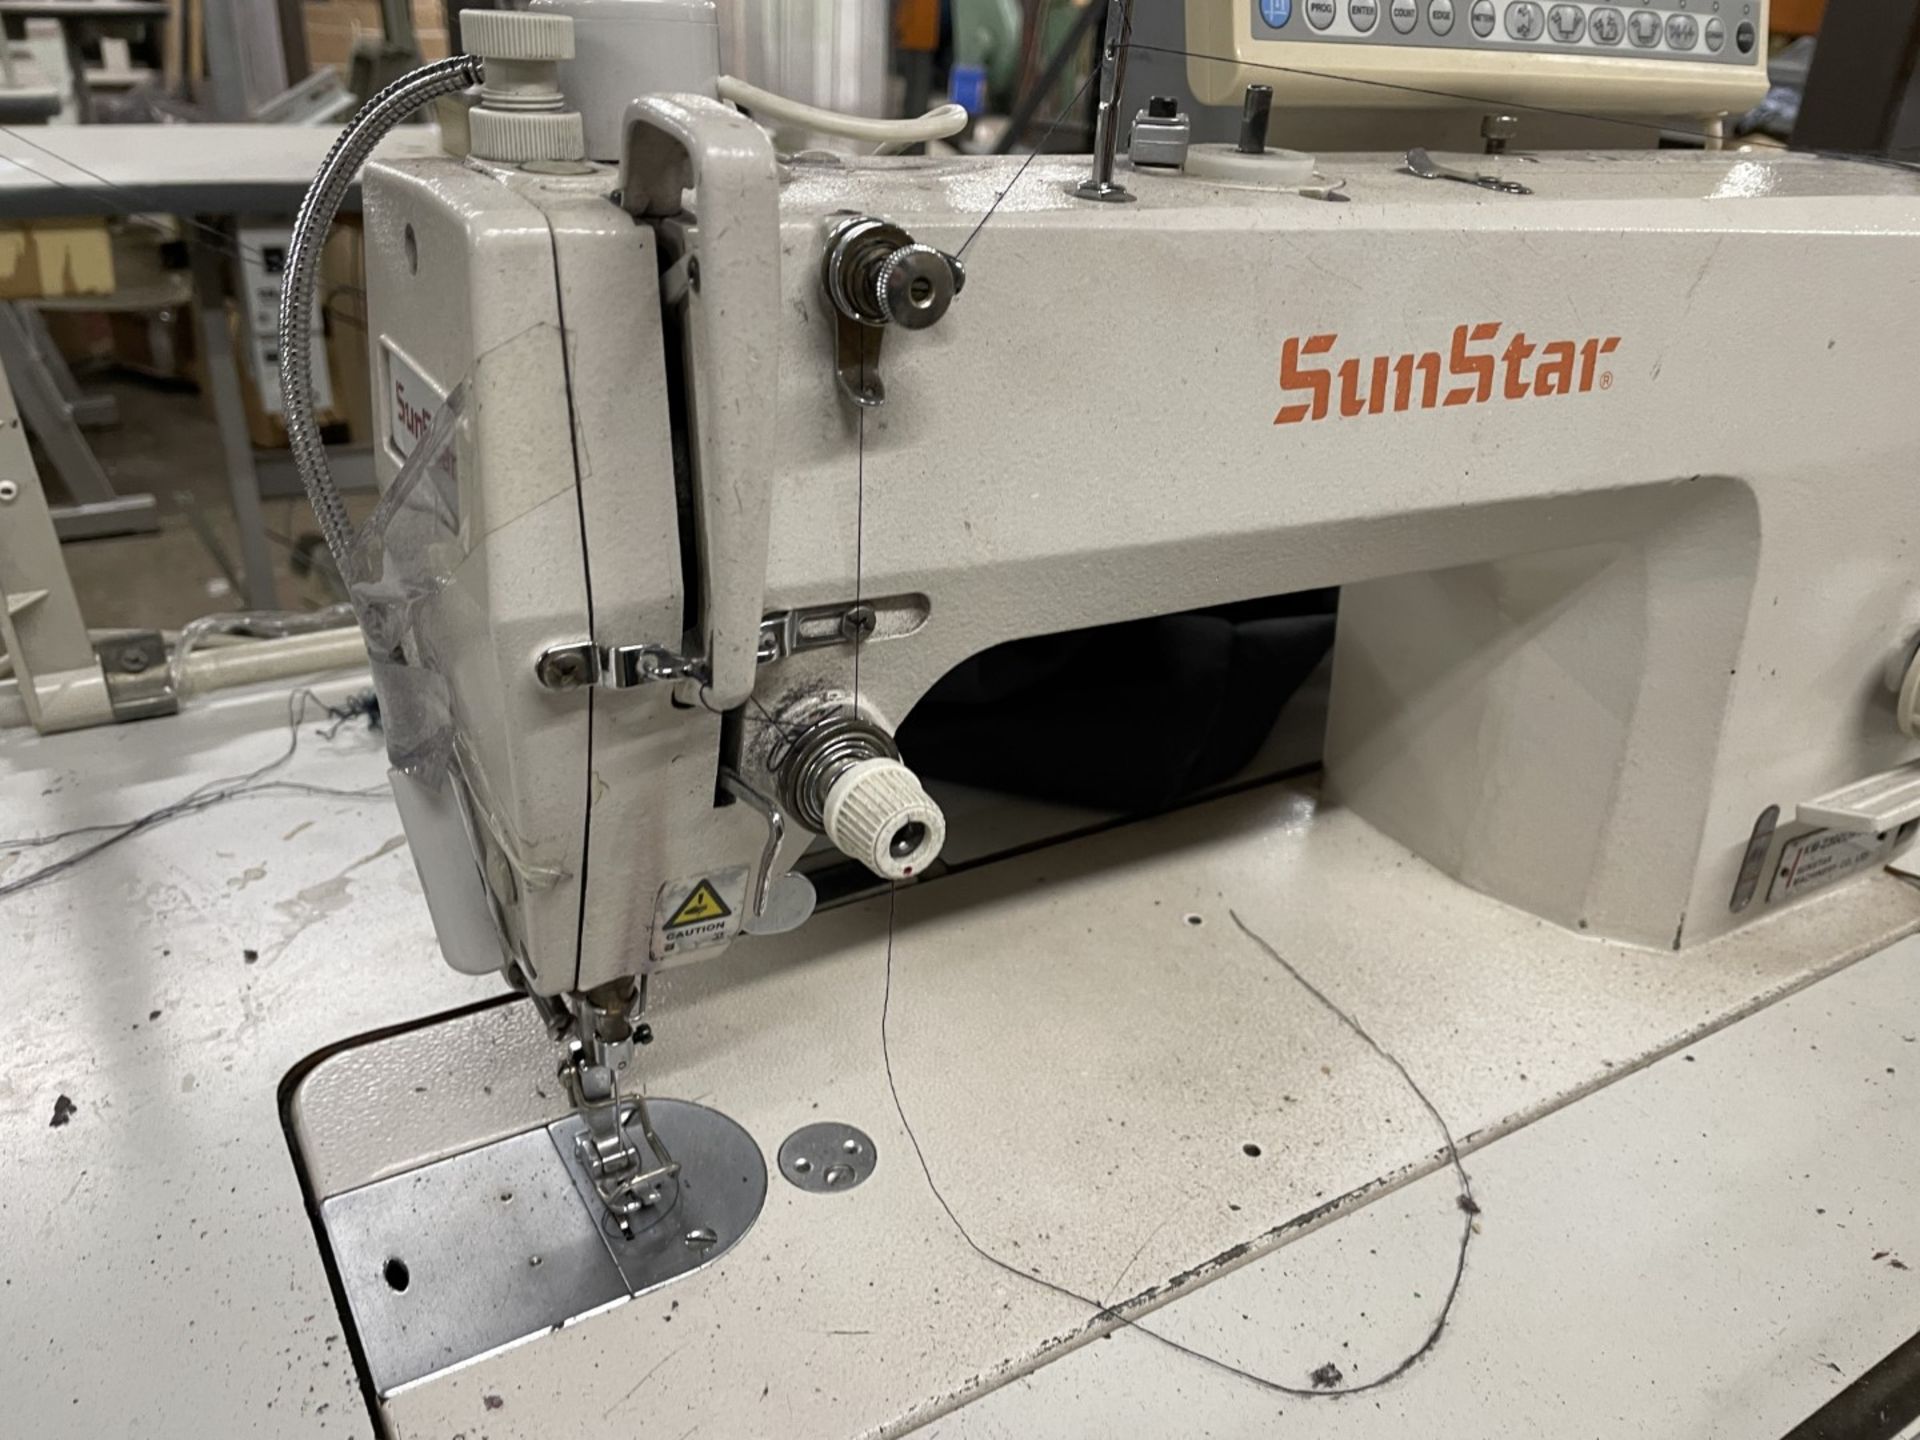 1 x Sunstar KM2300 UMG Single Needle Double Lockstitch Industrial Sewing Machine With Table - Image 7 of 24